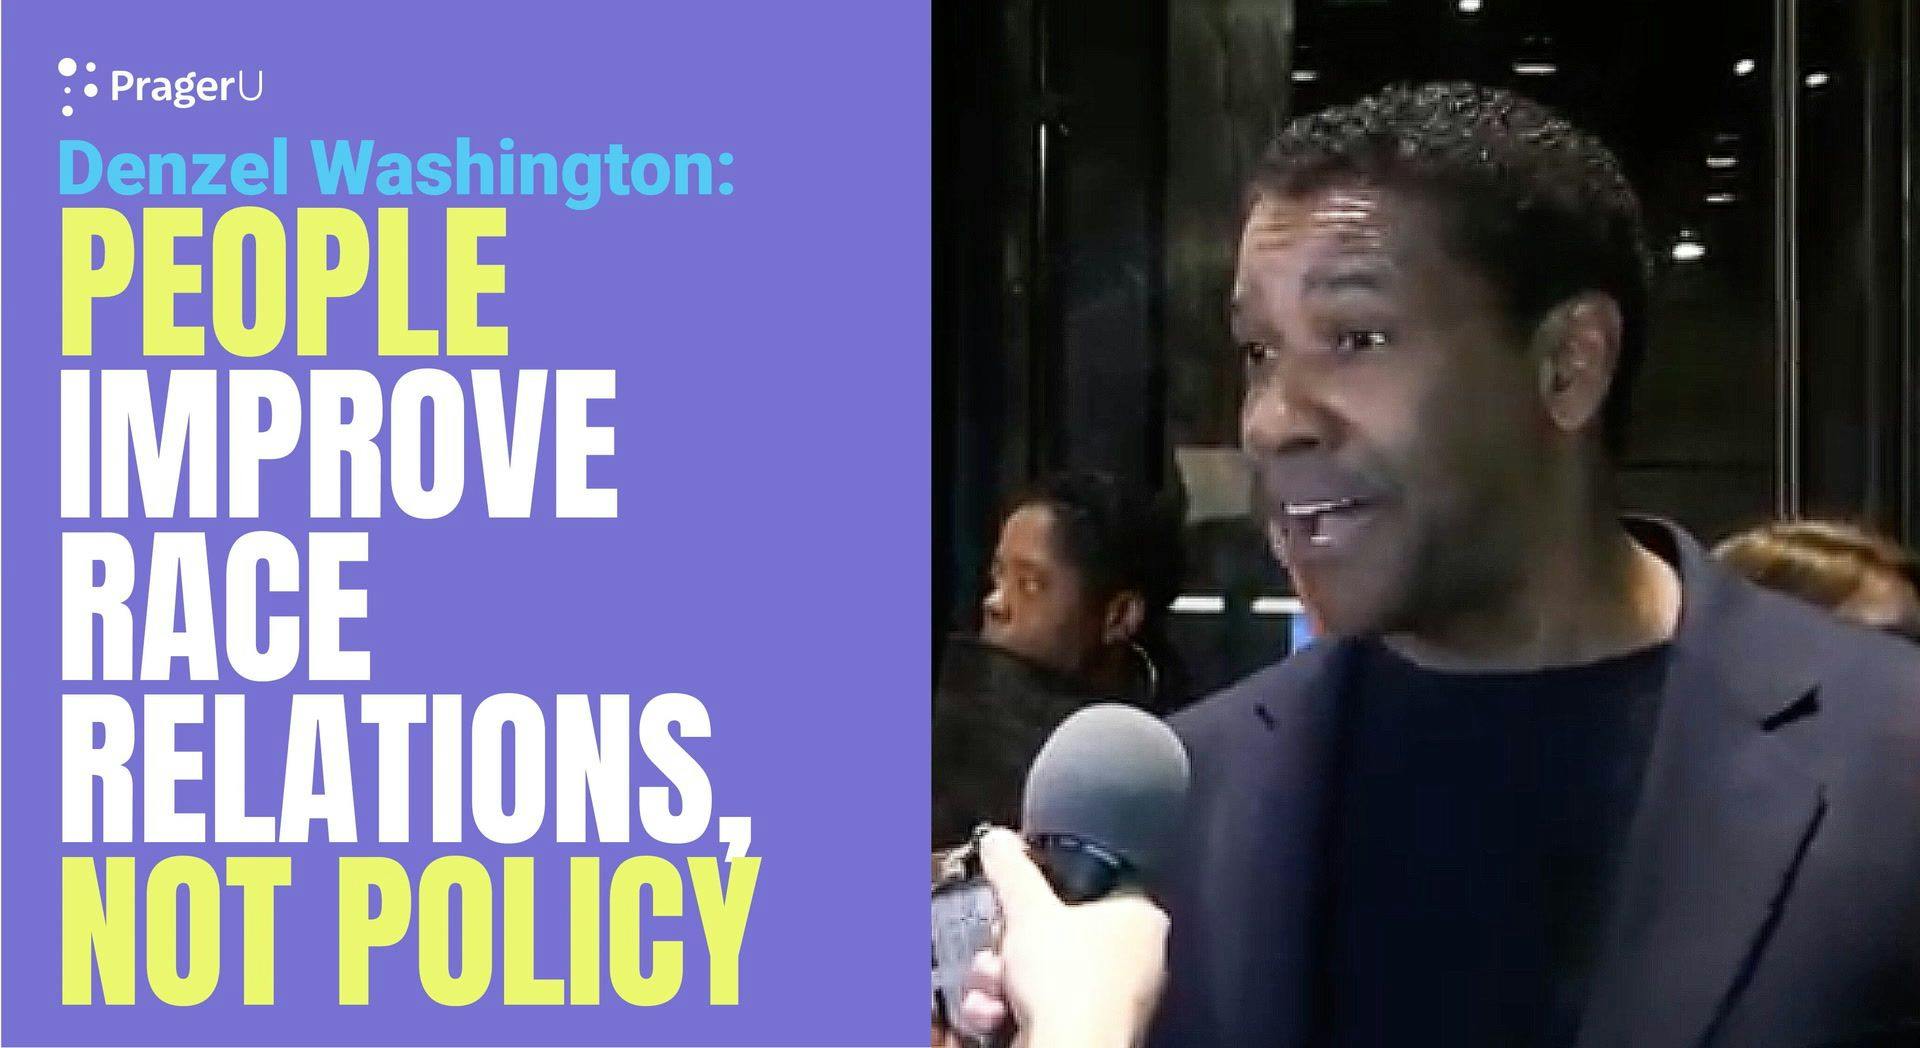 Denzel Washington: People improve race relations, not policy